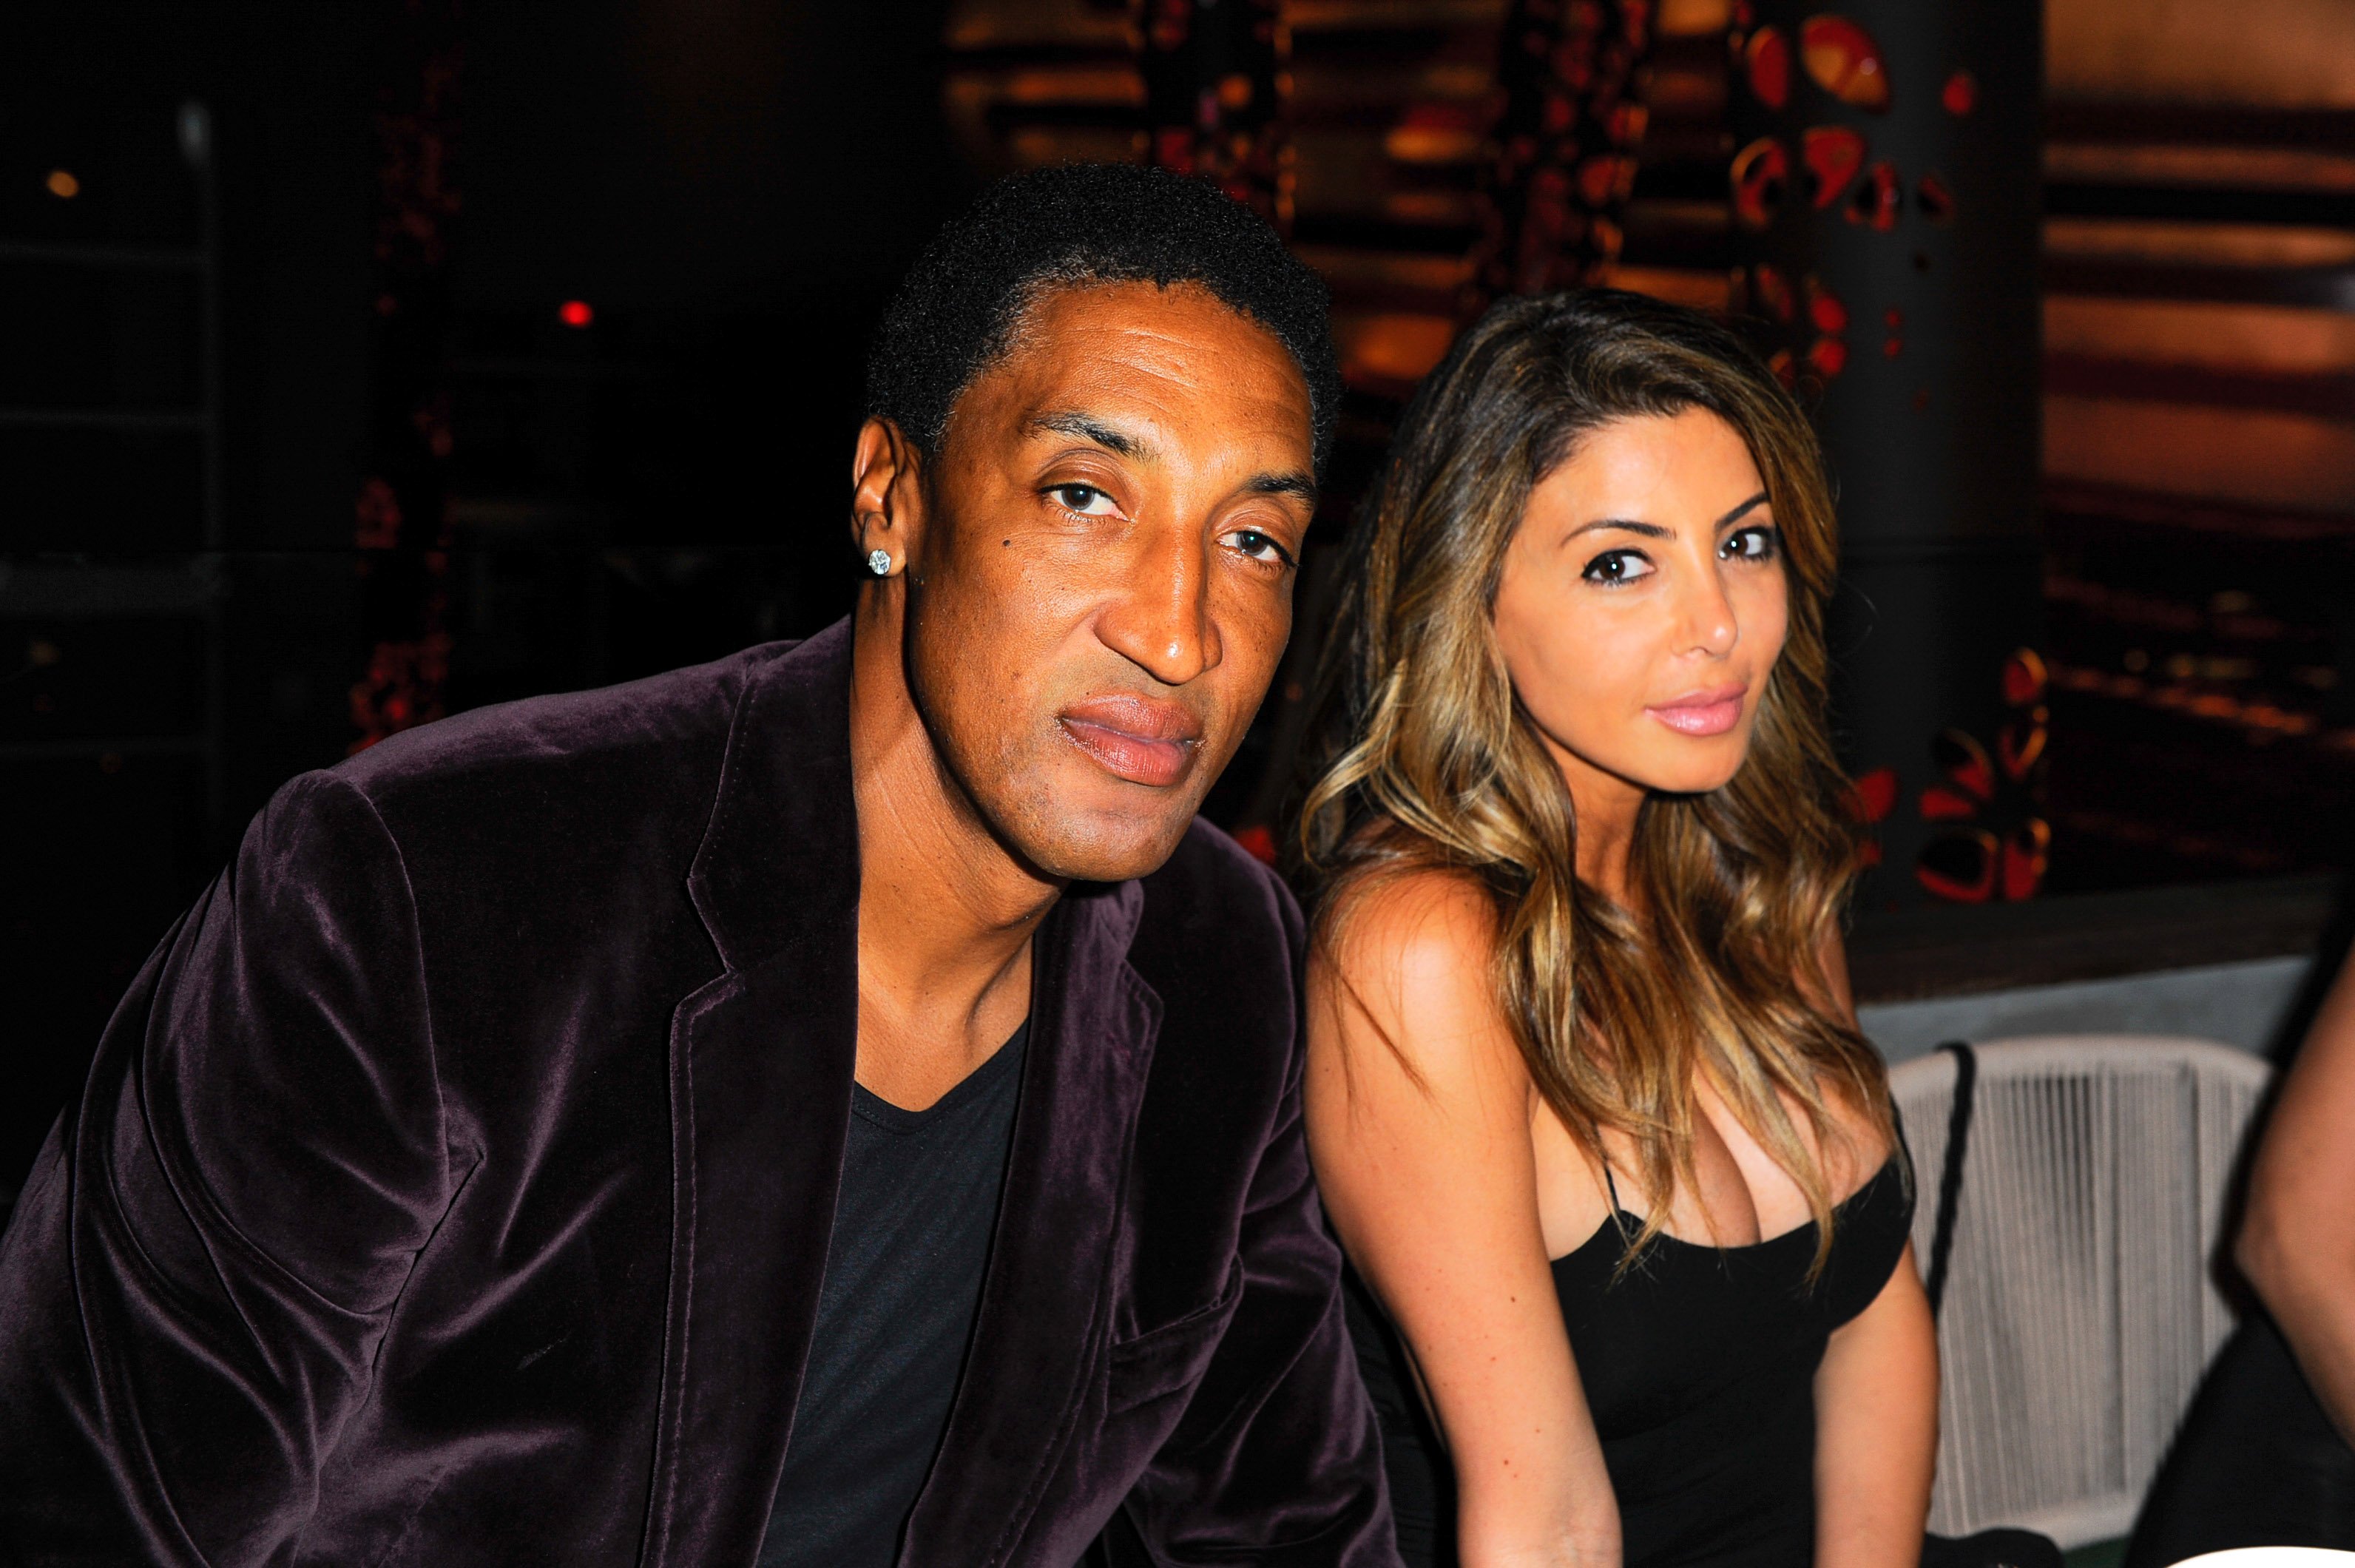 Scottie Pippen and Larsa Pippen attend the Avion Reserva 44 Celebrates Kygo's Haute Living Cover at Komodo on March 16, 2016 in Miami, Florida | Photo: GettyImages